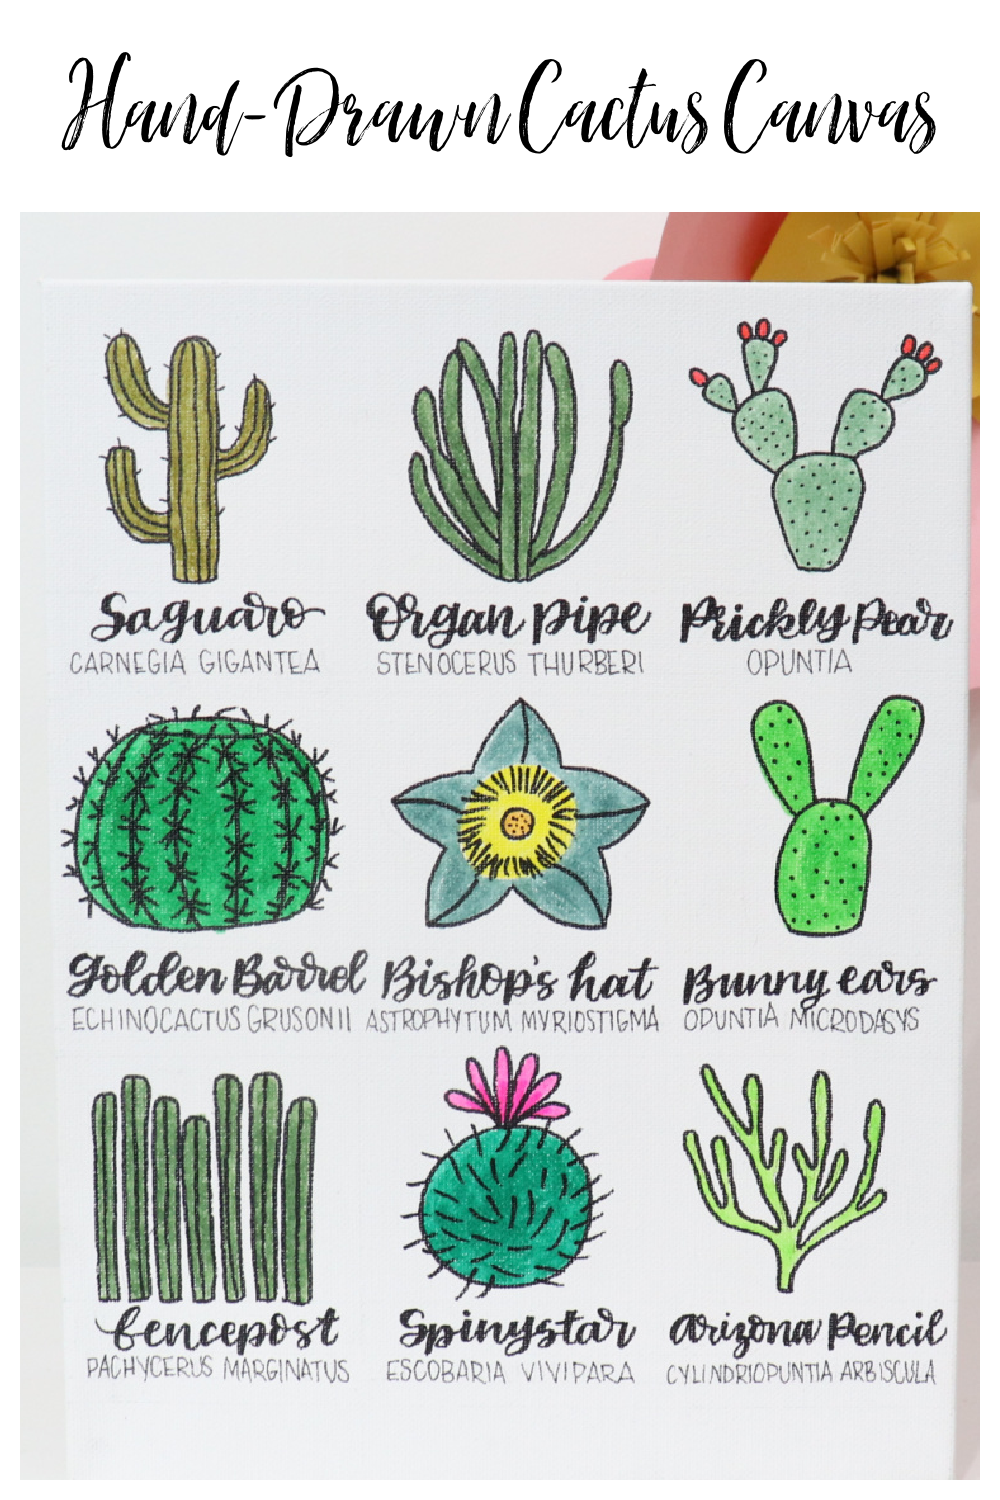 Image contains a 9x12 canvas decorated with nine cactus doodles, each labeled with their name and scientific name. 